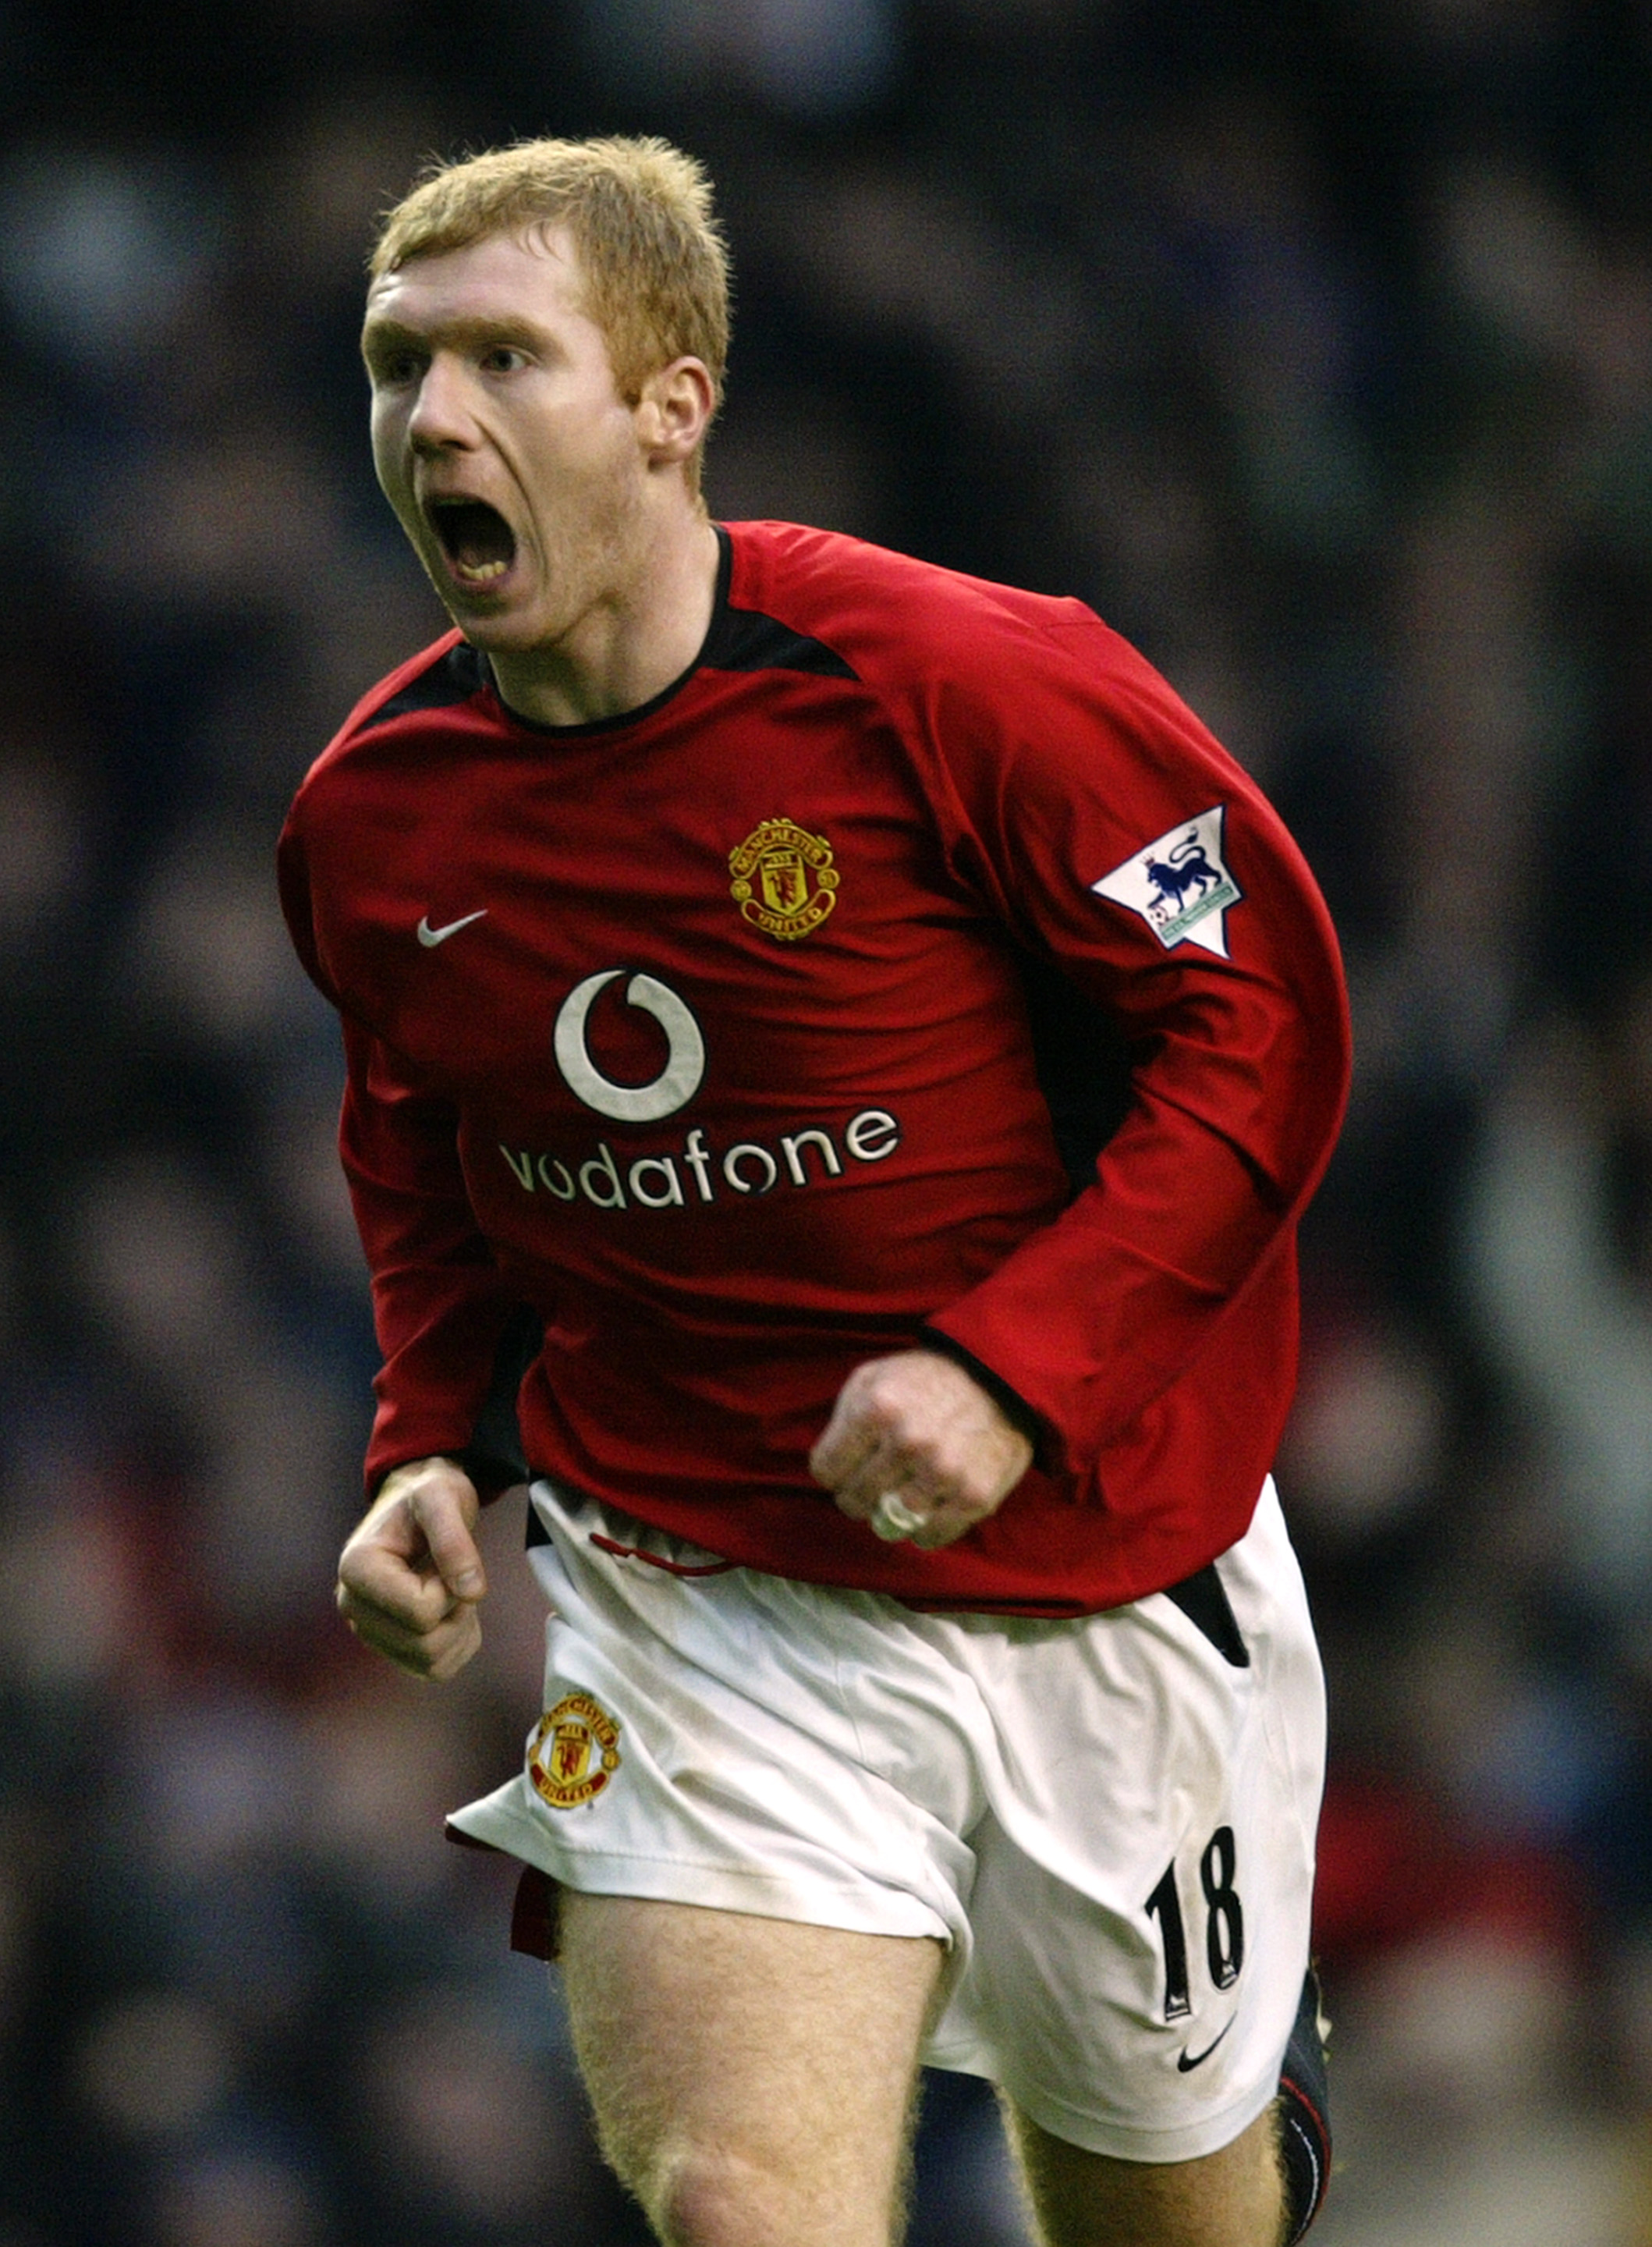 MANCHESTER - DECEMBER 7:  Paul Scholes of Man Utd celebrates after scoring the second goal during the Manchester United v Arsenal FA Barclaycard Premiership match at Old Trafford on December 7, 2002 in Manchester, England. (Photo by Alex Livesey/Getty Ima